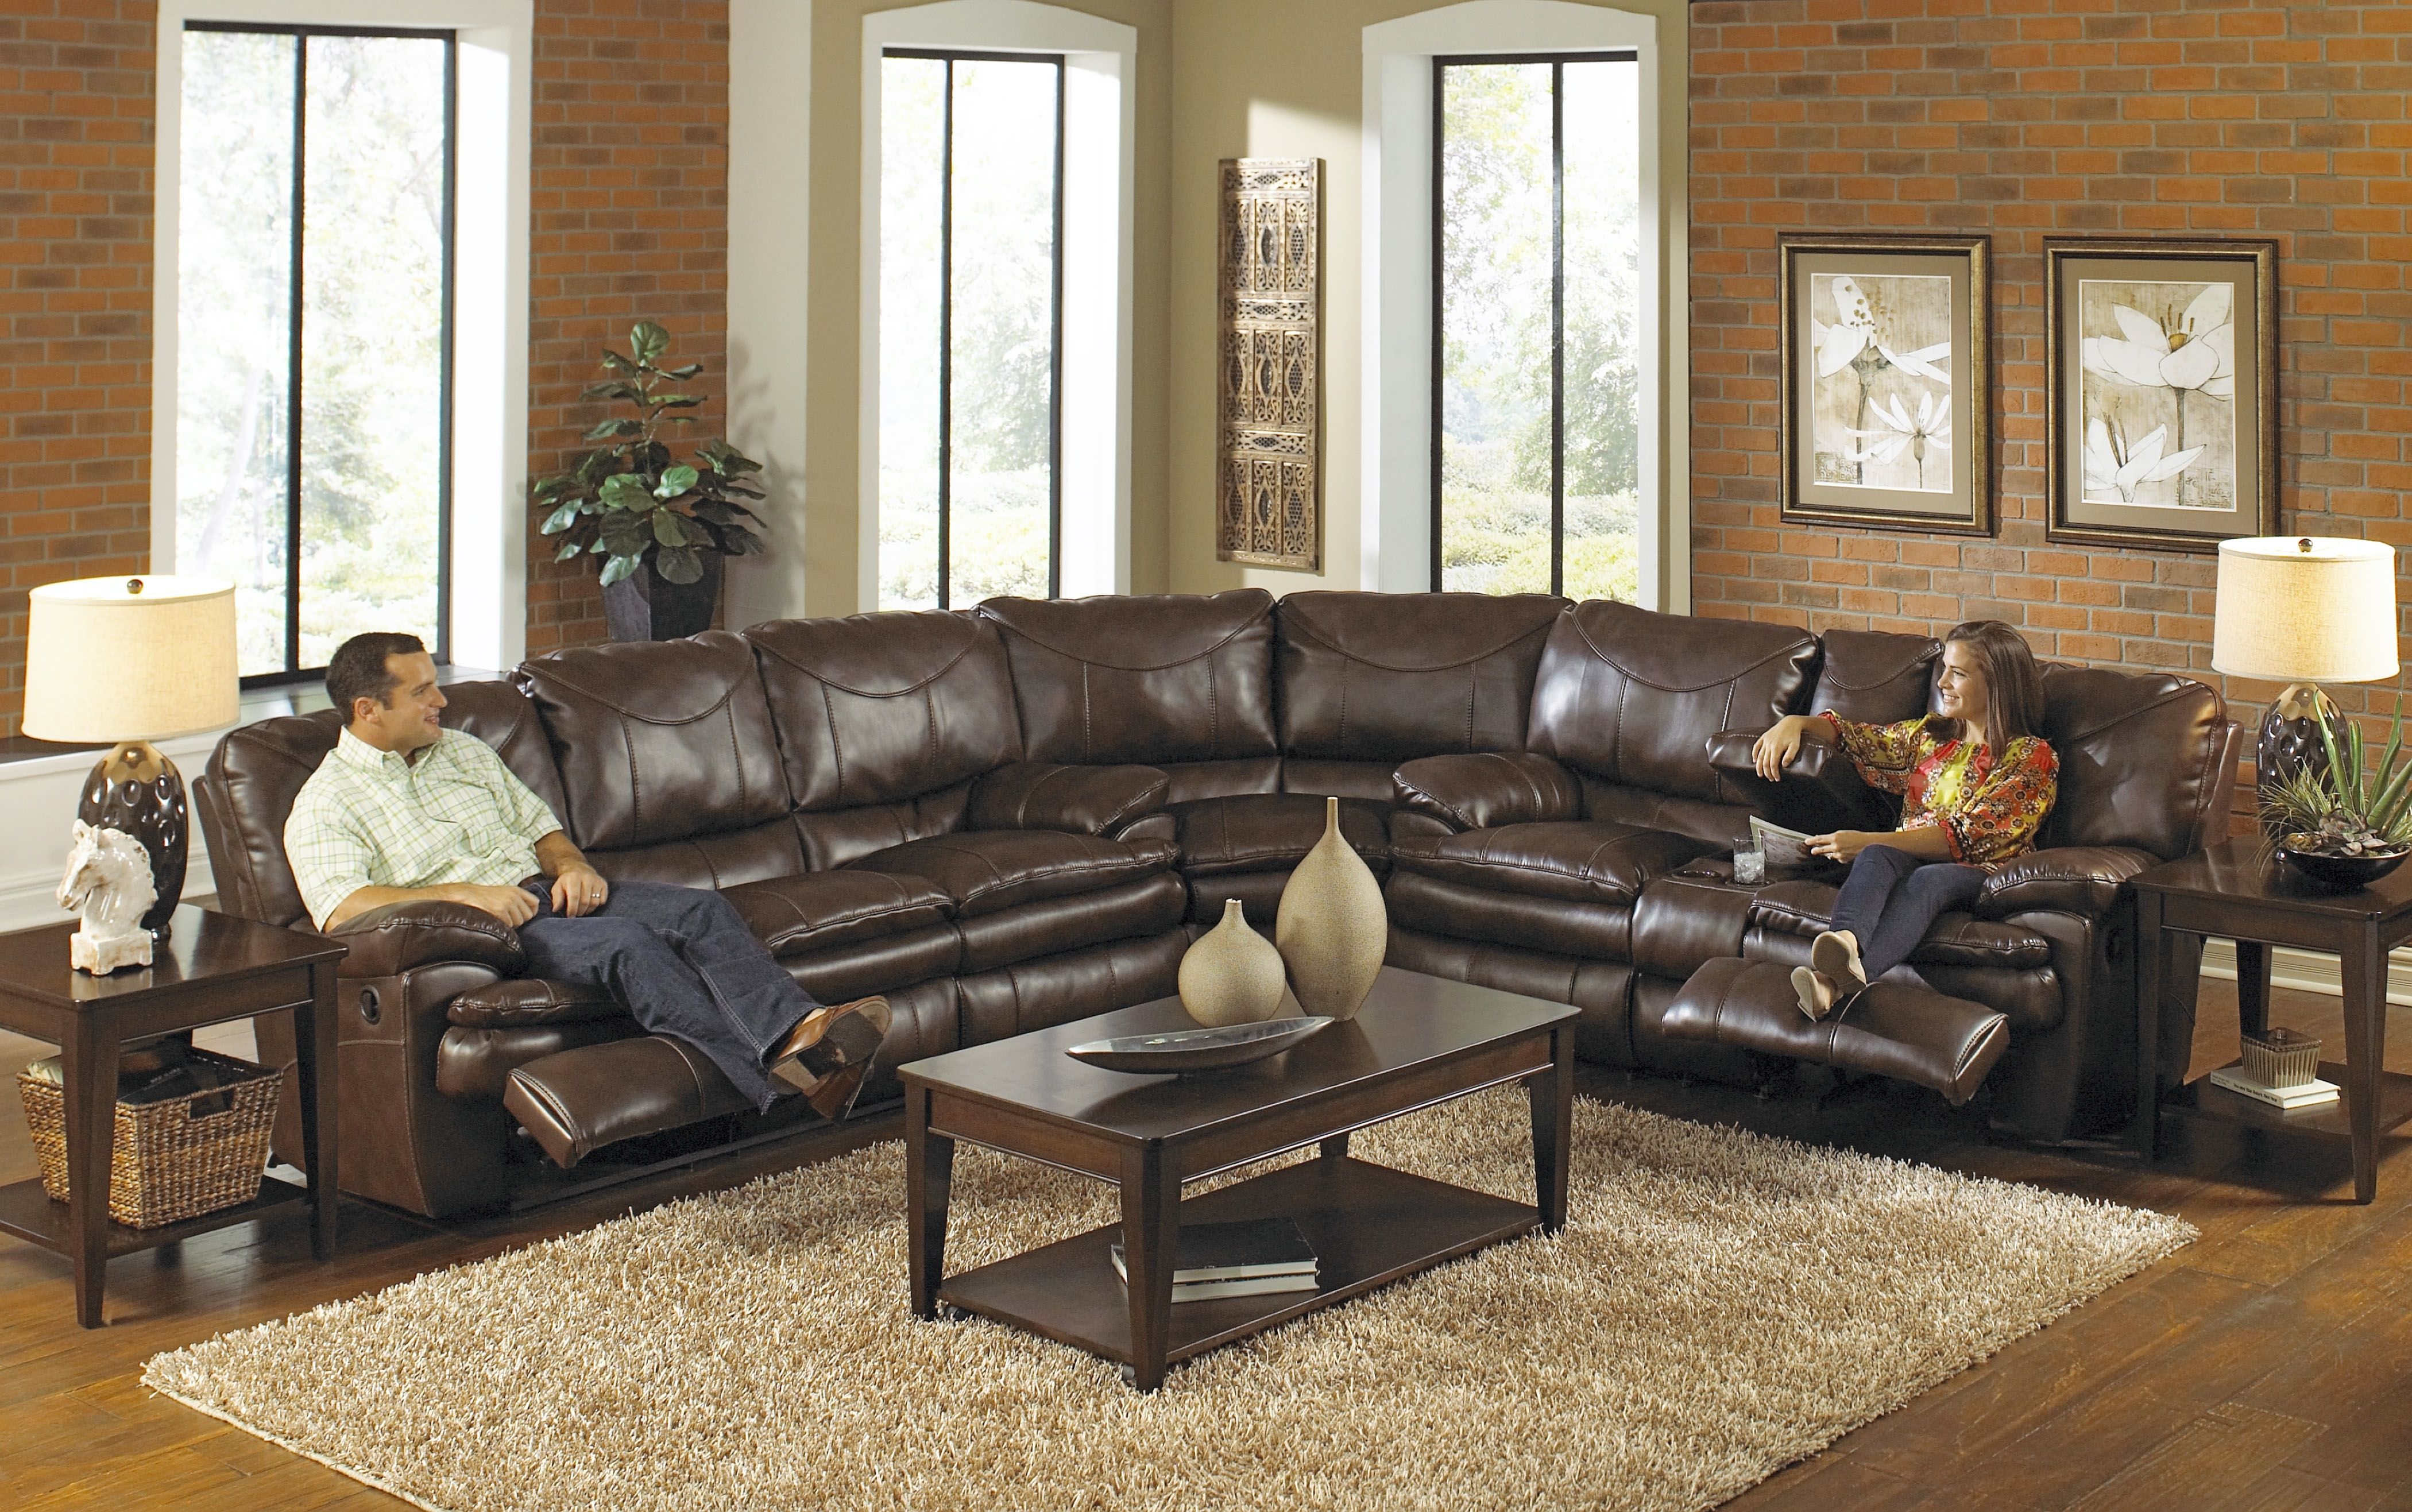 Buy Large Sectional Sofas Perfect For Your Large Living Room Throughout Large Sectional Sofas (View 7 of 10)